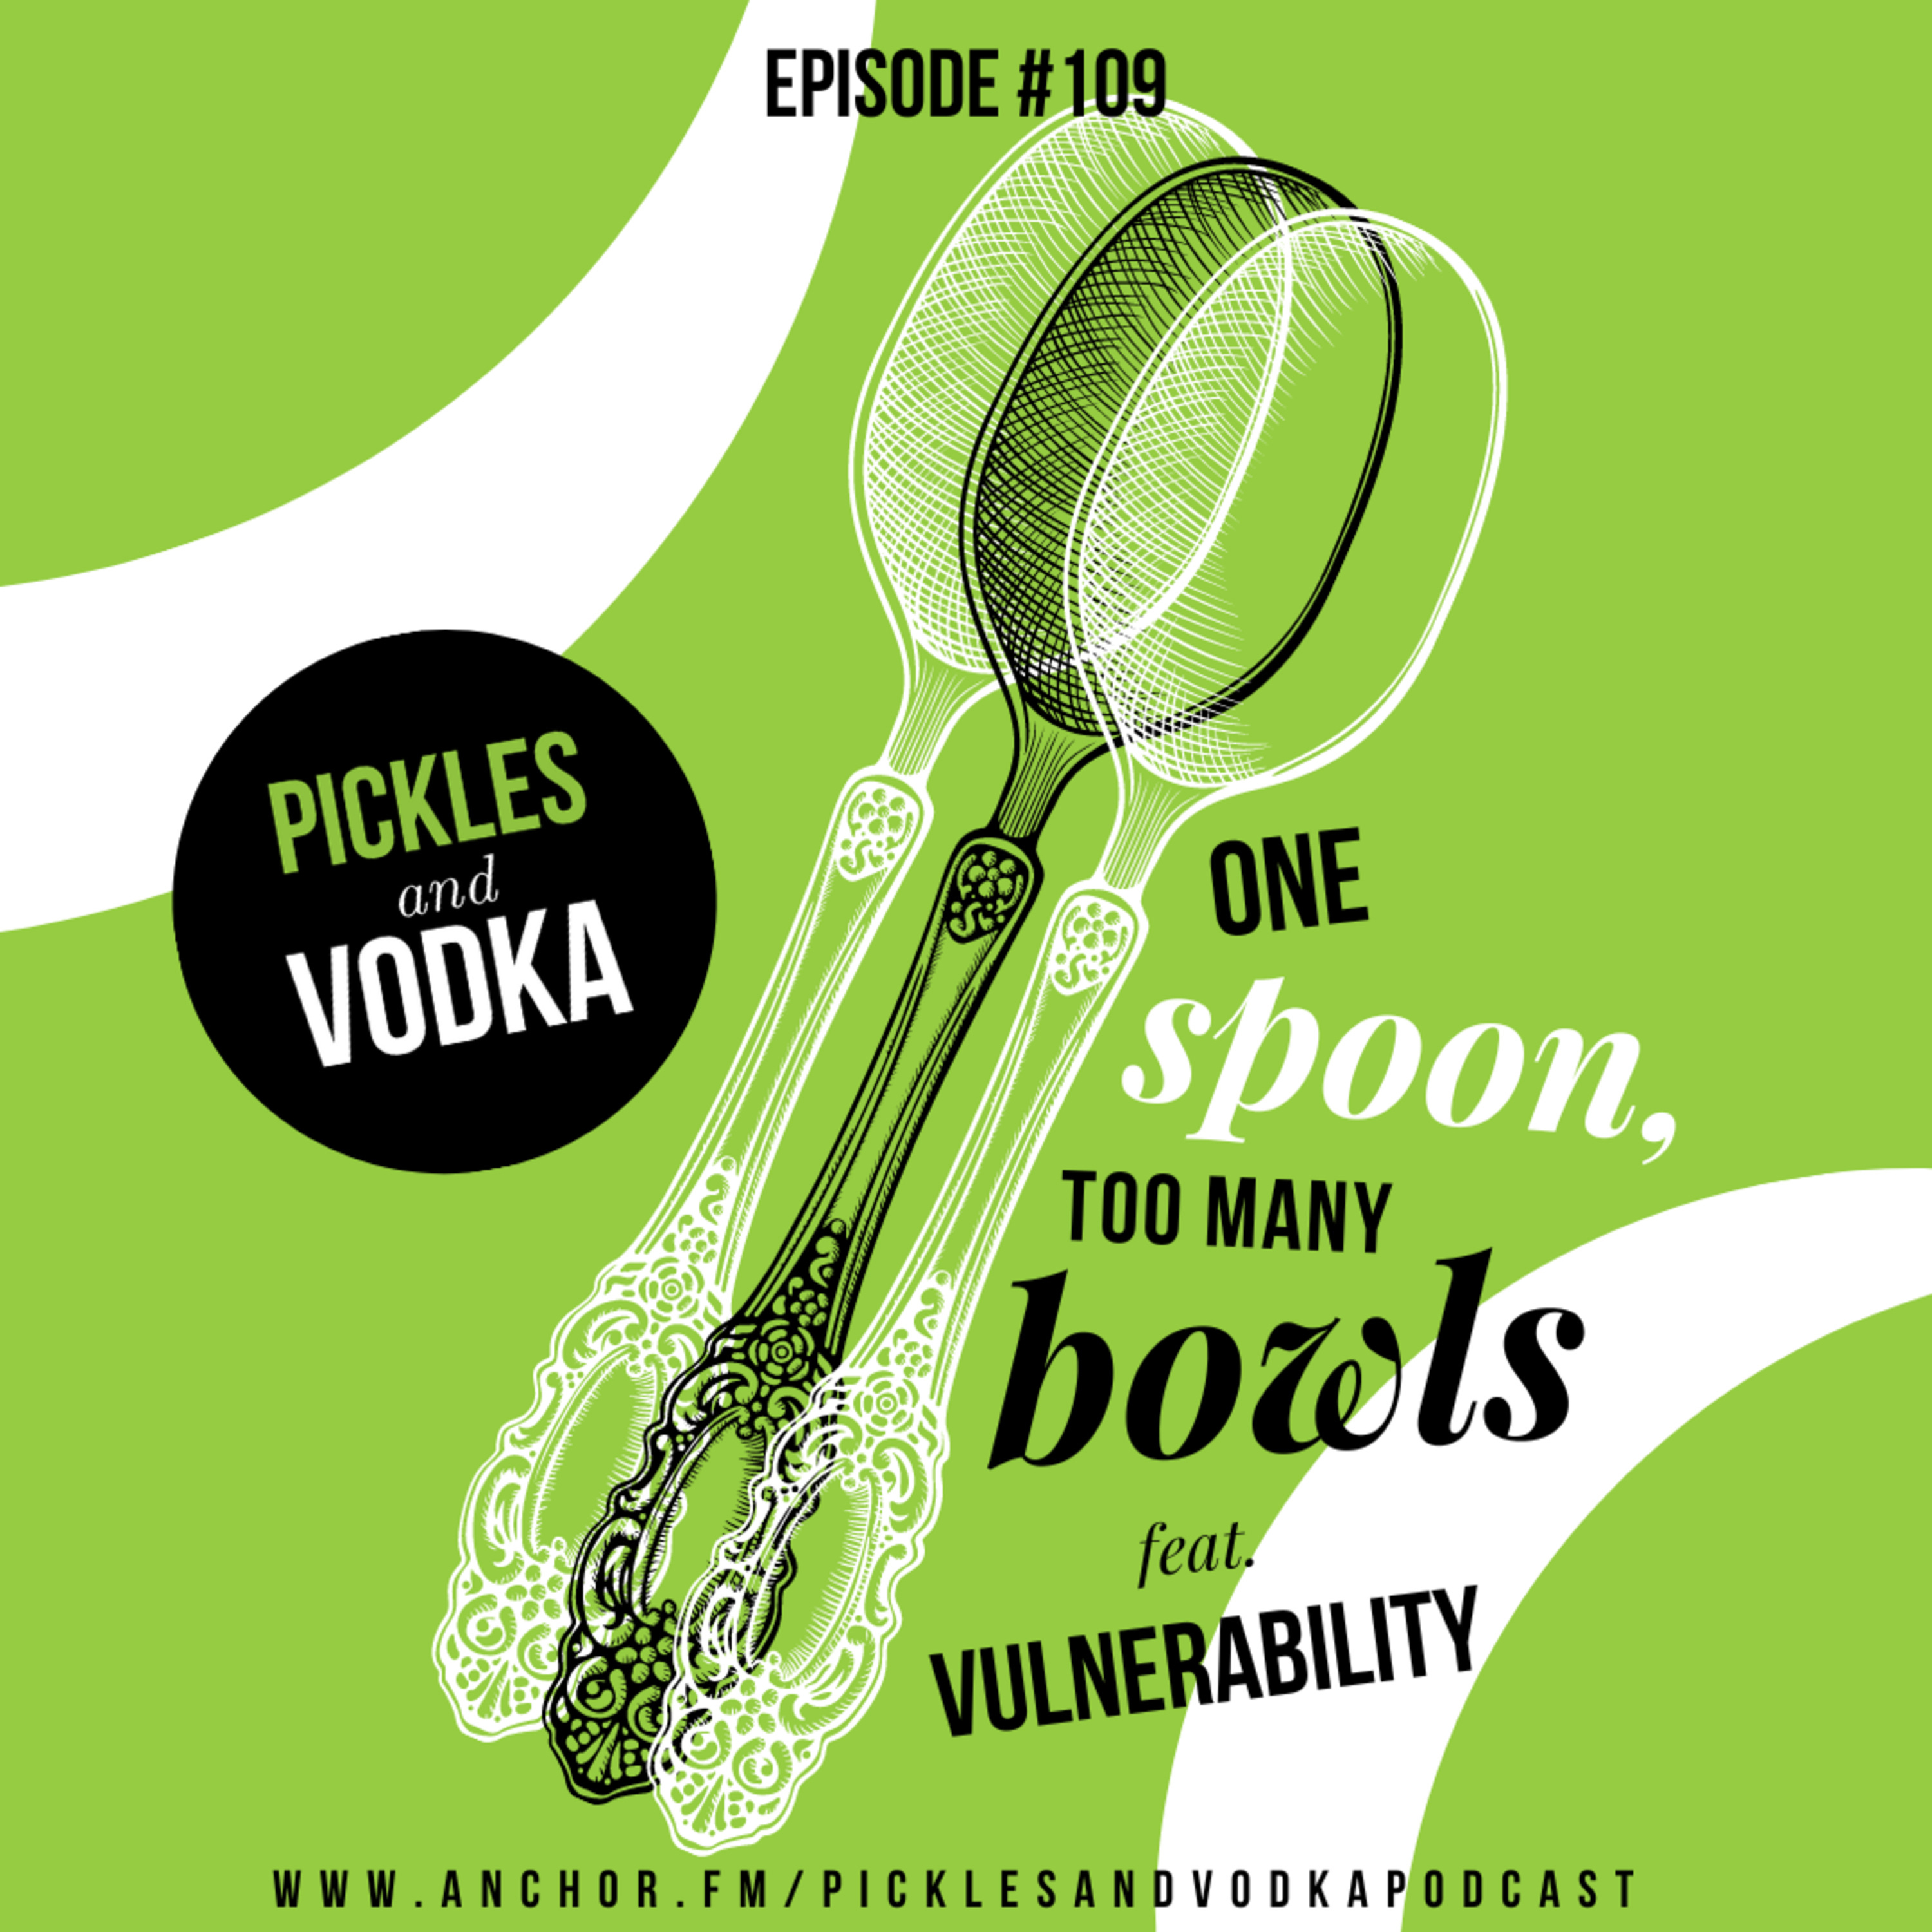 #109 One Spoon, Too Many Bowls feat. VULNERABILITY